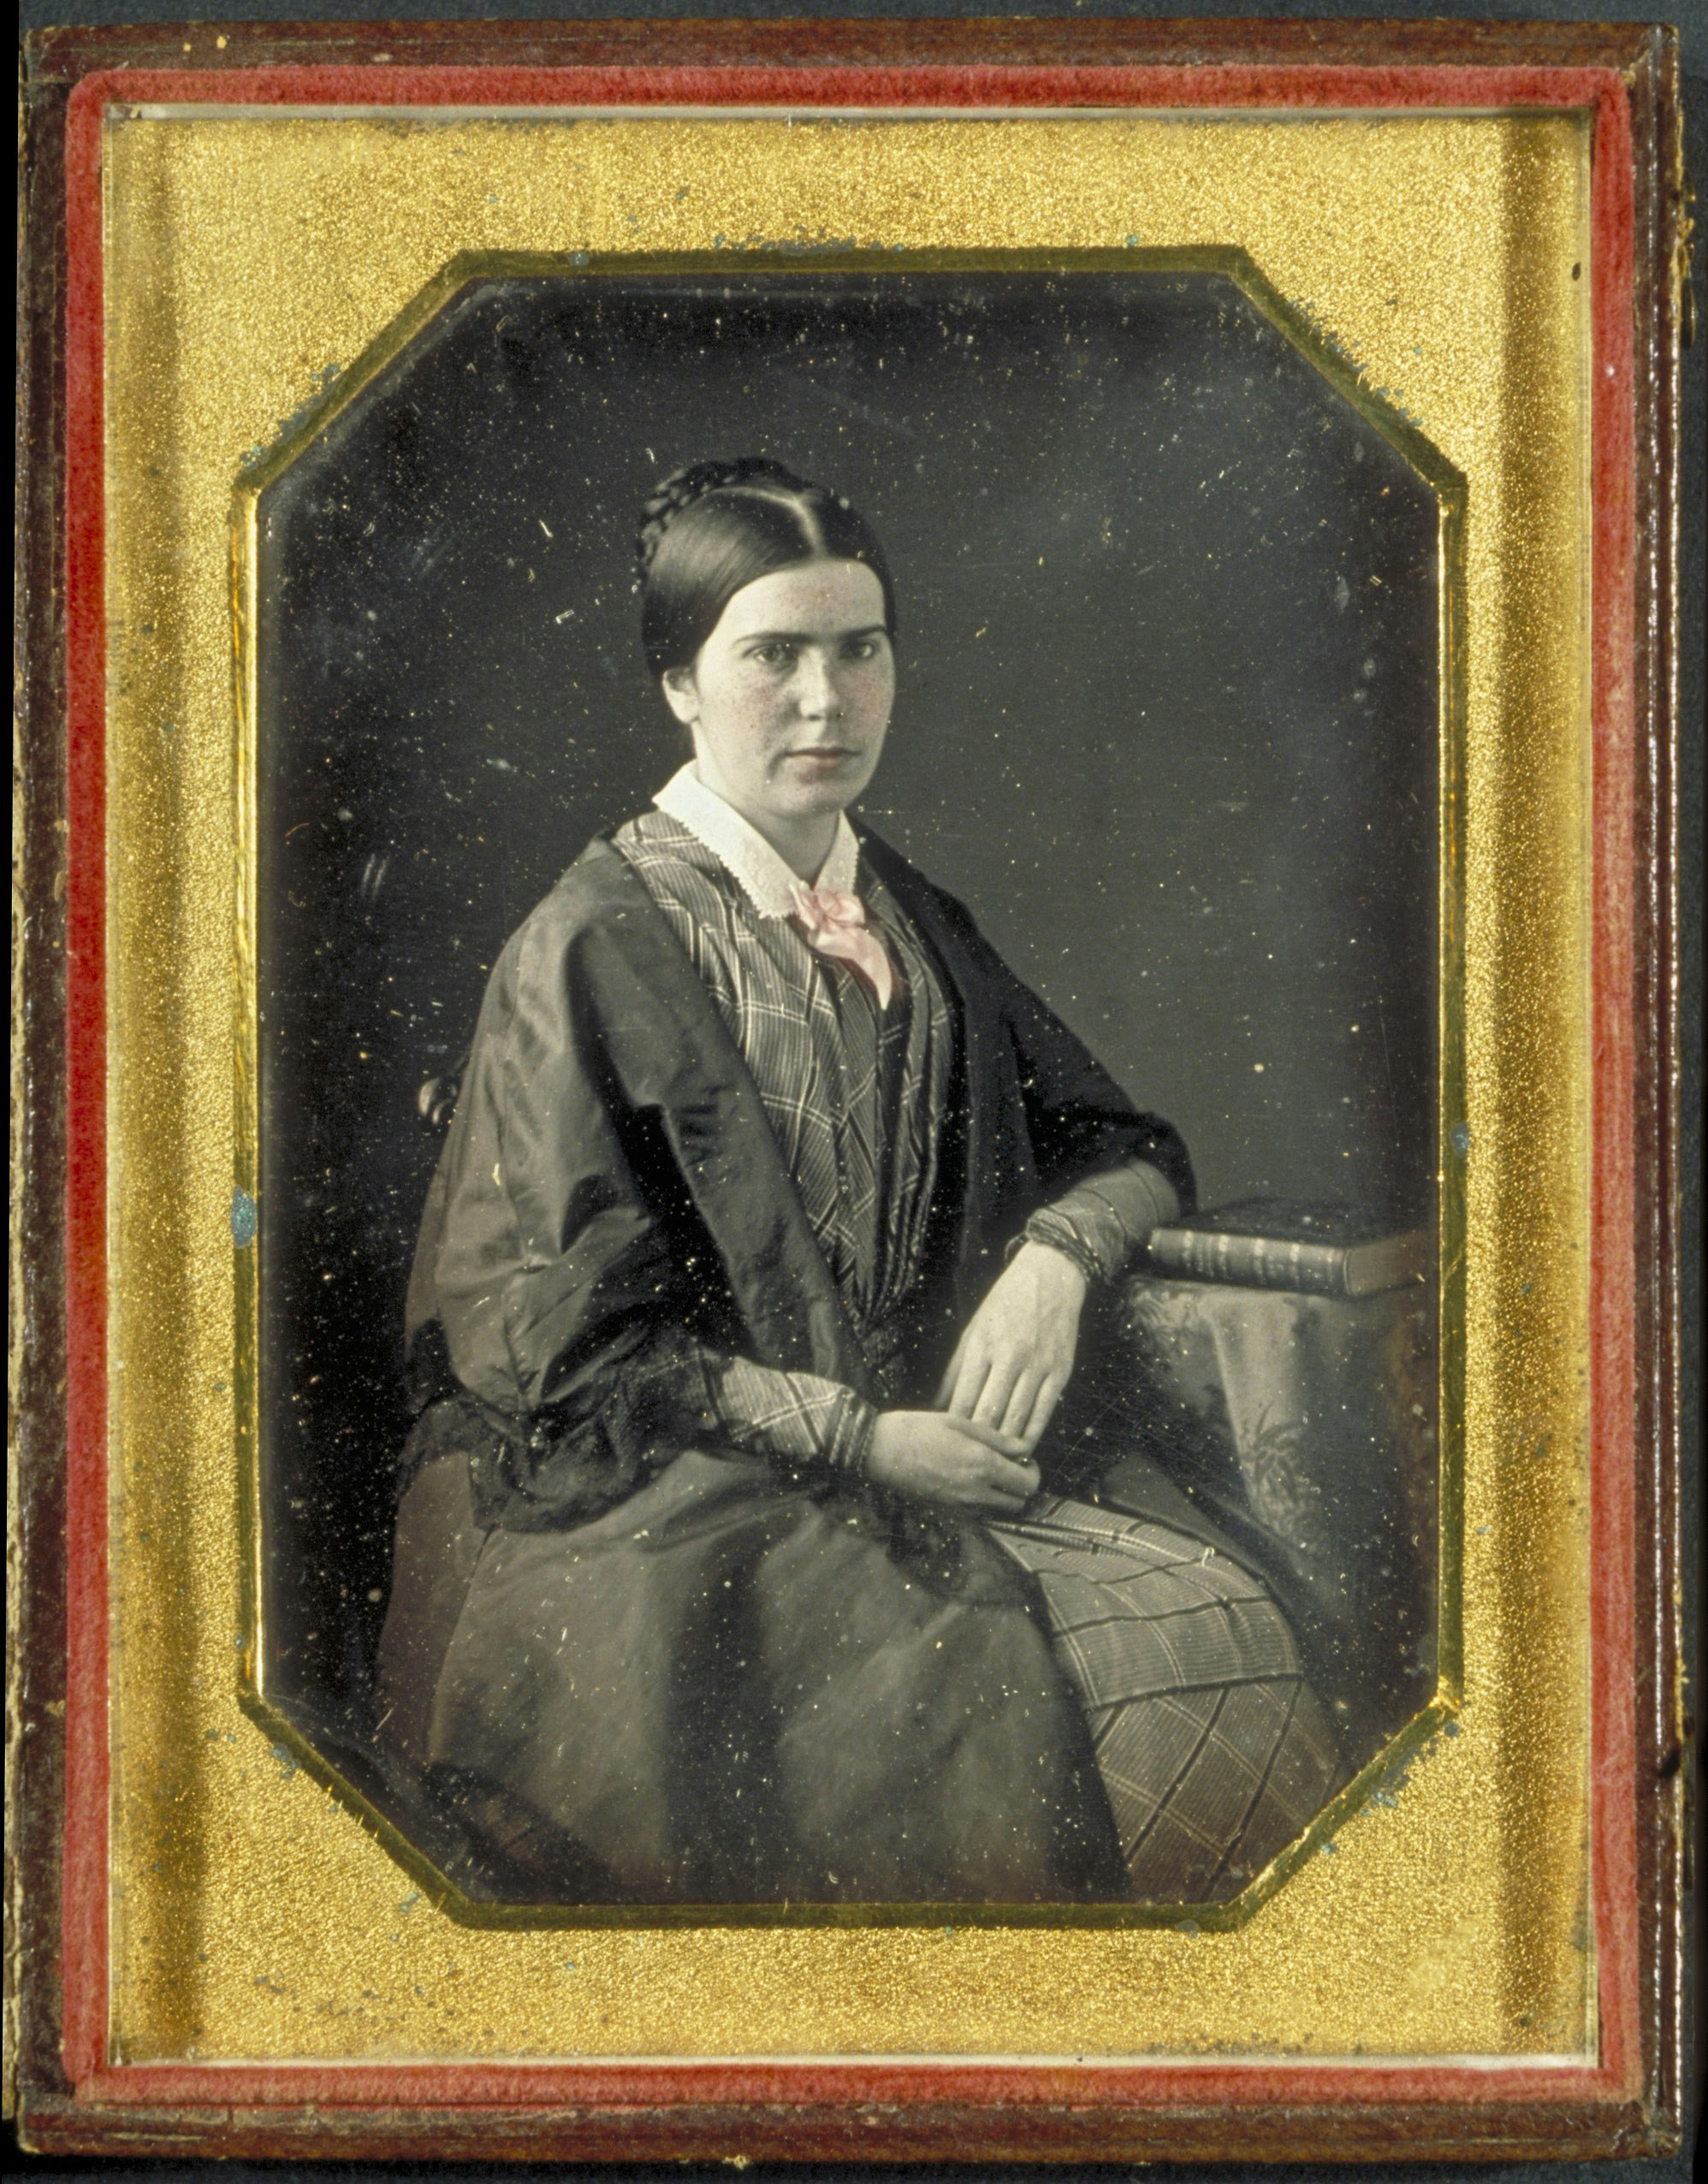 Portrait of Marian Blackwell seated